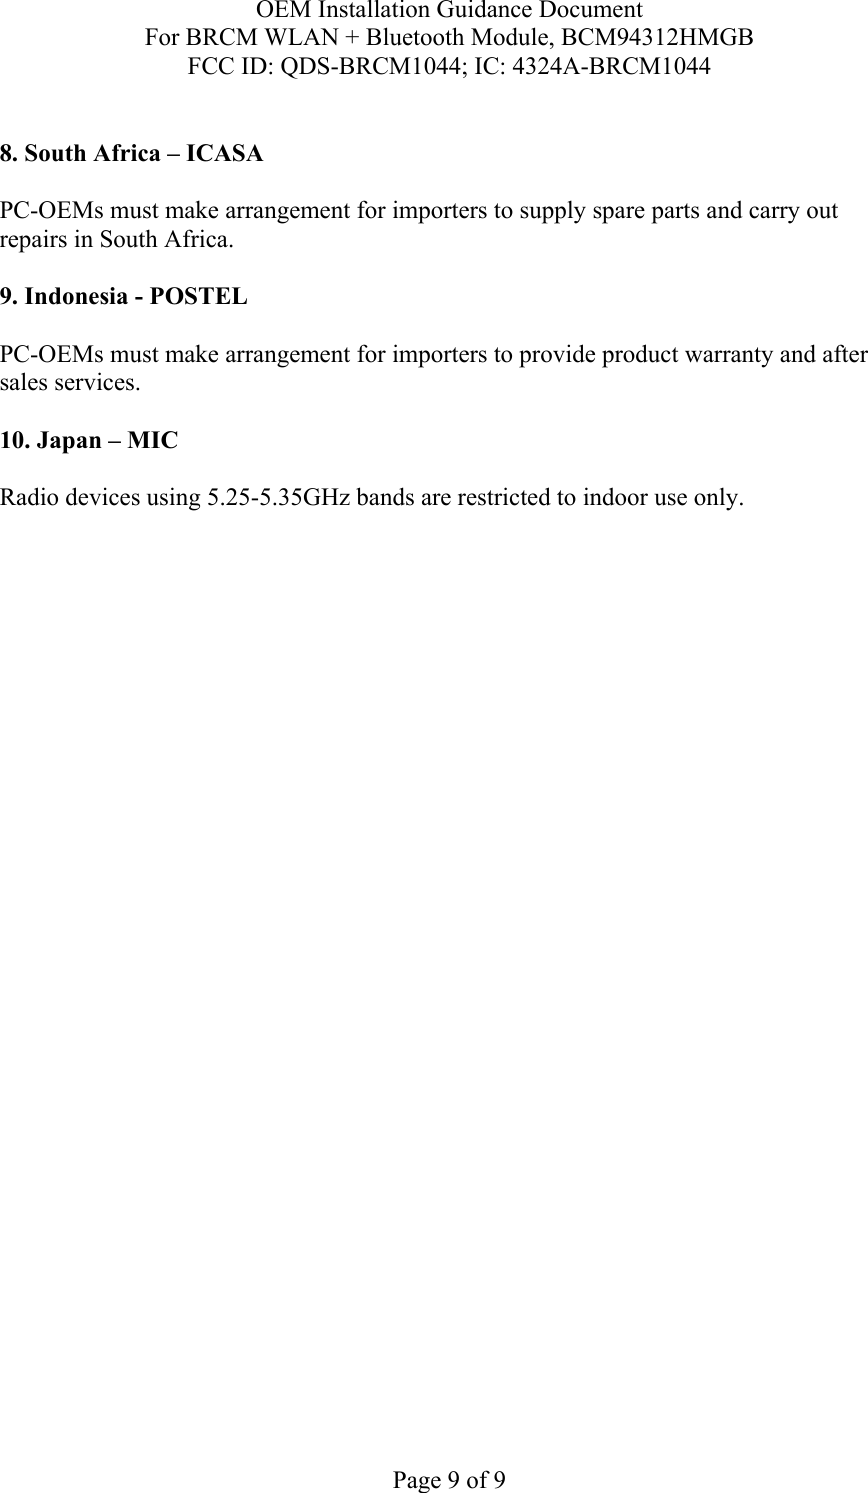 OEM Installation Guidance Document For BRCM WLAN + Bluetooth Module, BCM94312HMGB FCC ID: QDS-BRCM1044; IC: 4324A-BRCM1044  Page 9 of 9  8. South Africa – ICASA  PC-OEMs must make arrangement for importers to supply spare parts and carry out repairs in South Africa.  9. Indonesia - POSTEL  PC-OEMs must make arrangement for importers to provide product warranty and after sales services.   10. Japan – MIC  Radio devices using 5.25-5.35GHz bands are restricted to indoor use only.  